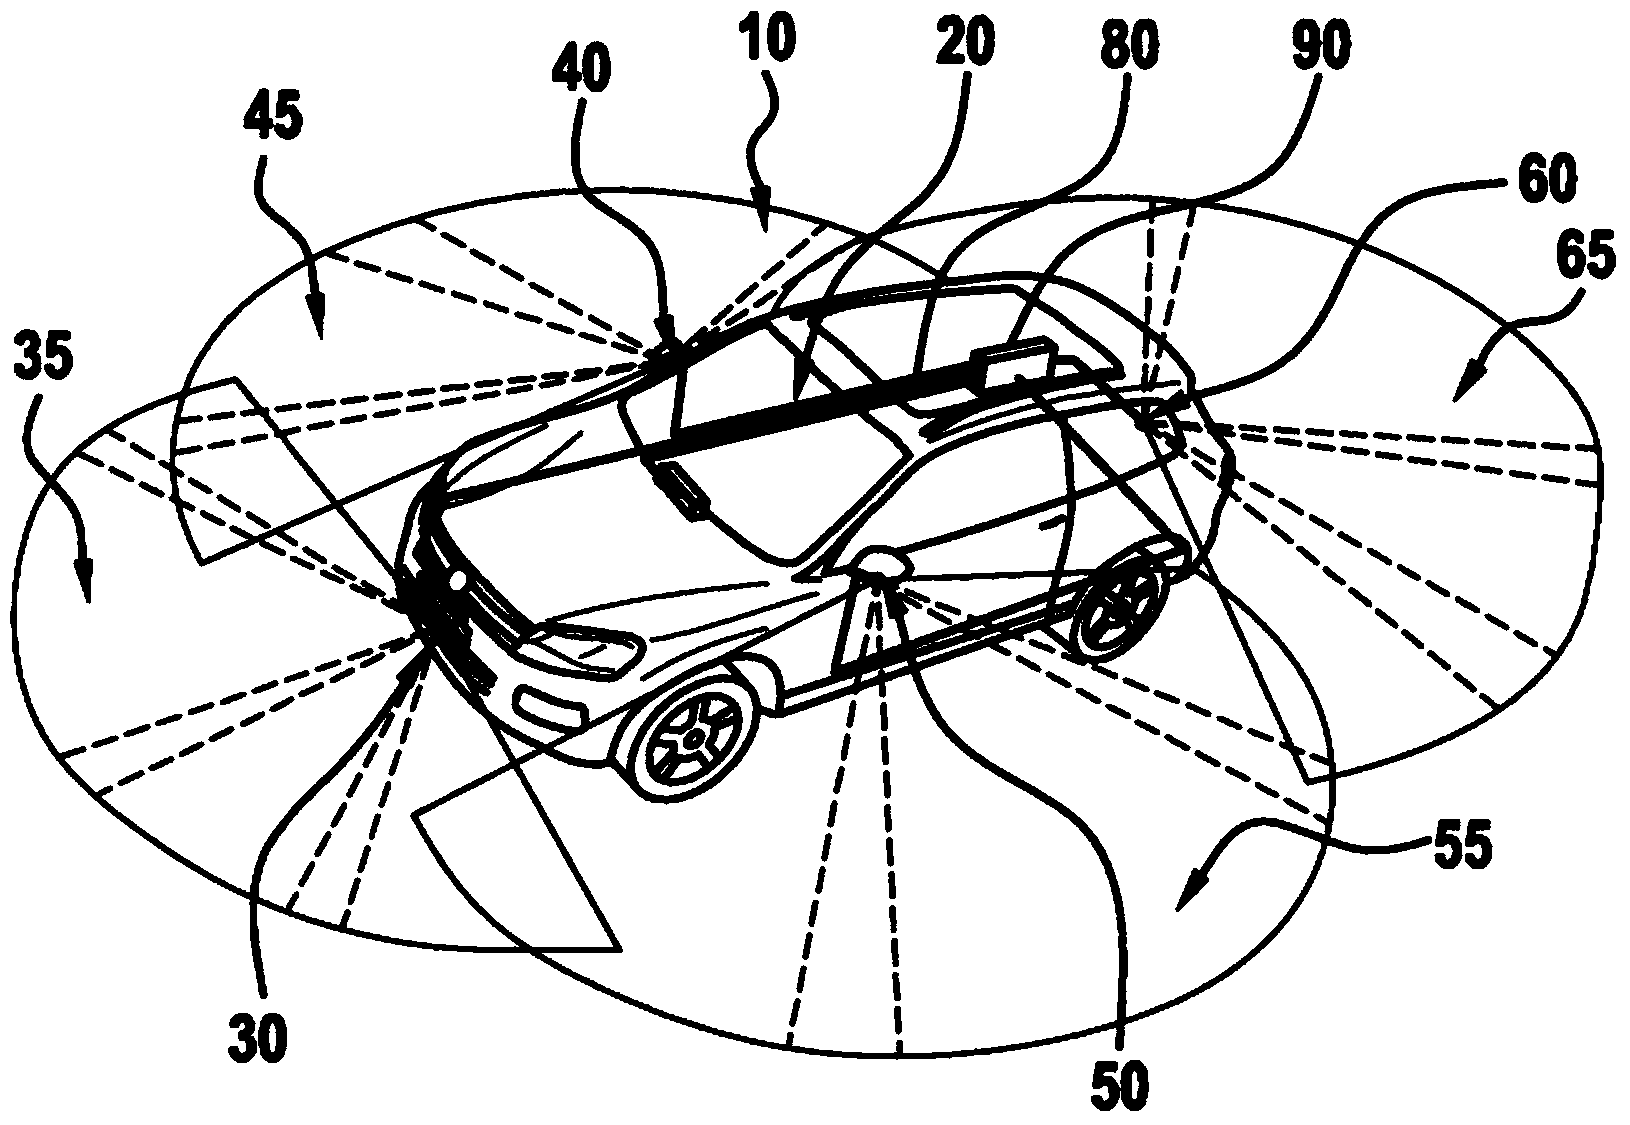 Vehicle camera system and method for providing a continuous image of the vehicle surroundings